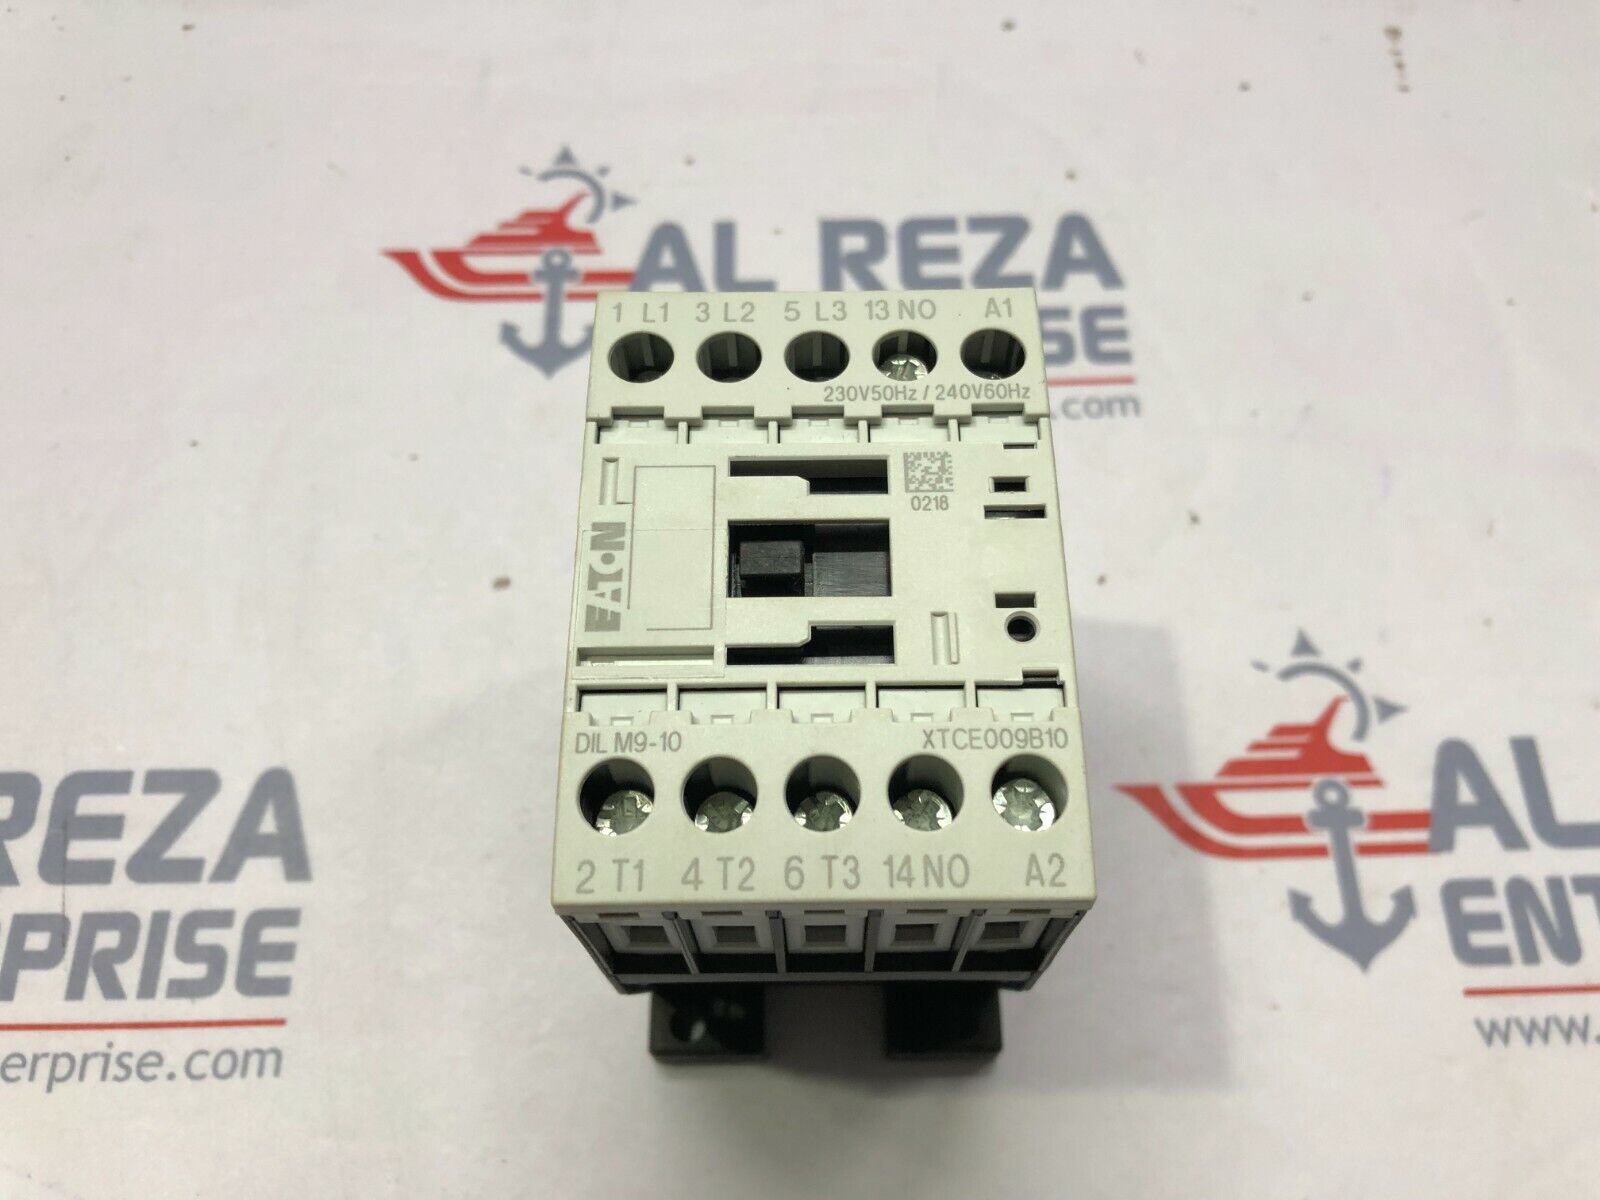 EATON DILM9-10 3-POLE CONTACTOR XTCE009B10F 230V